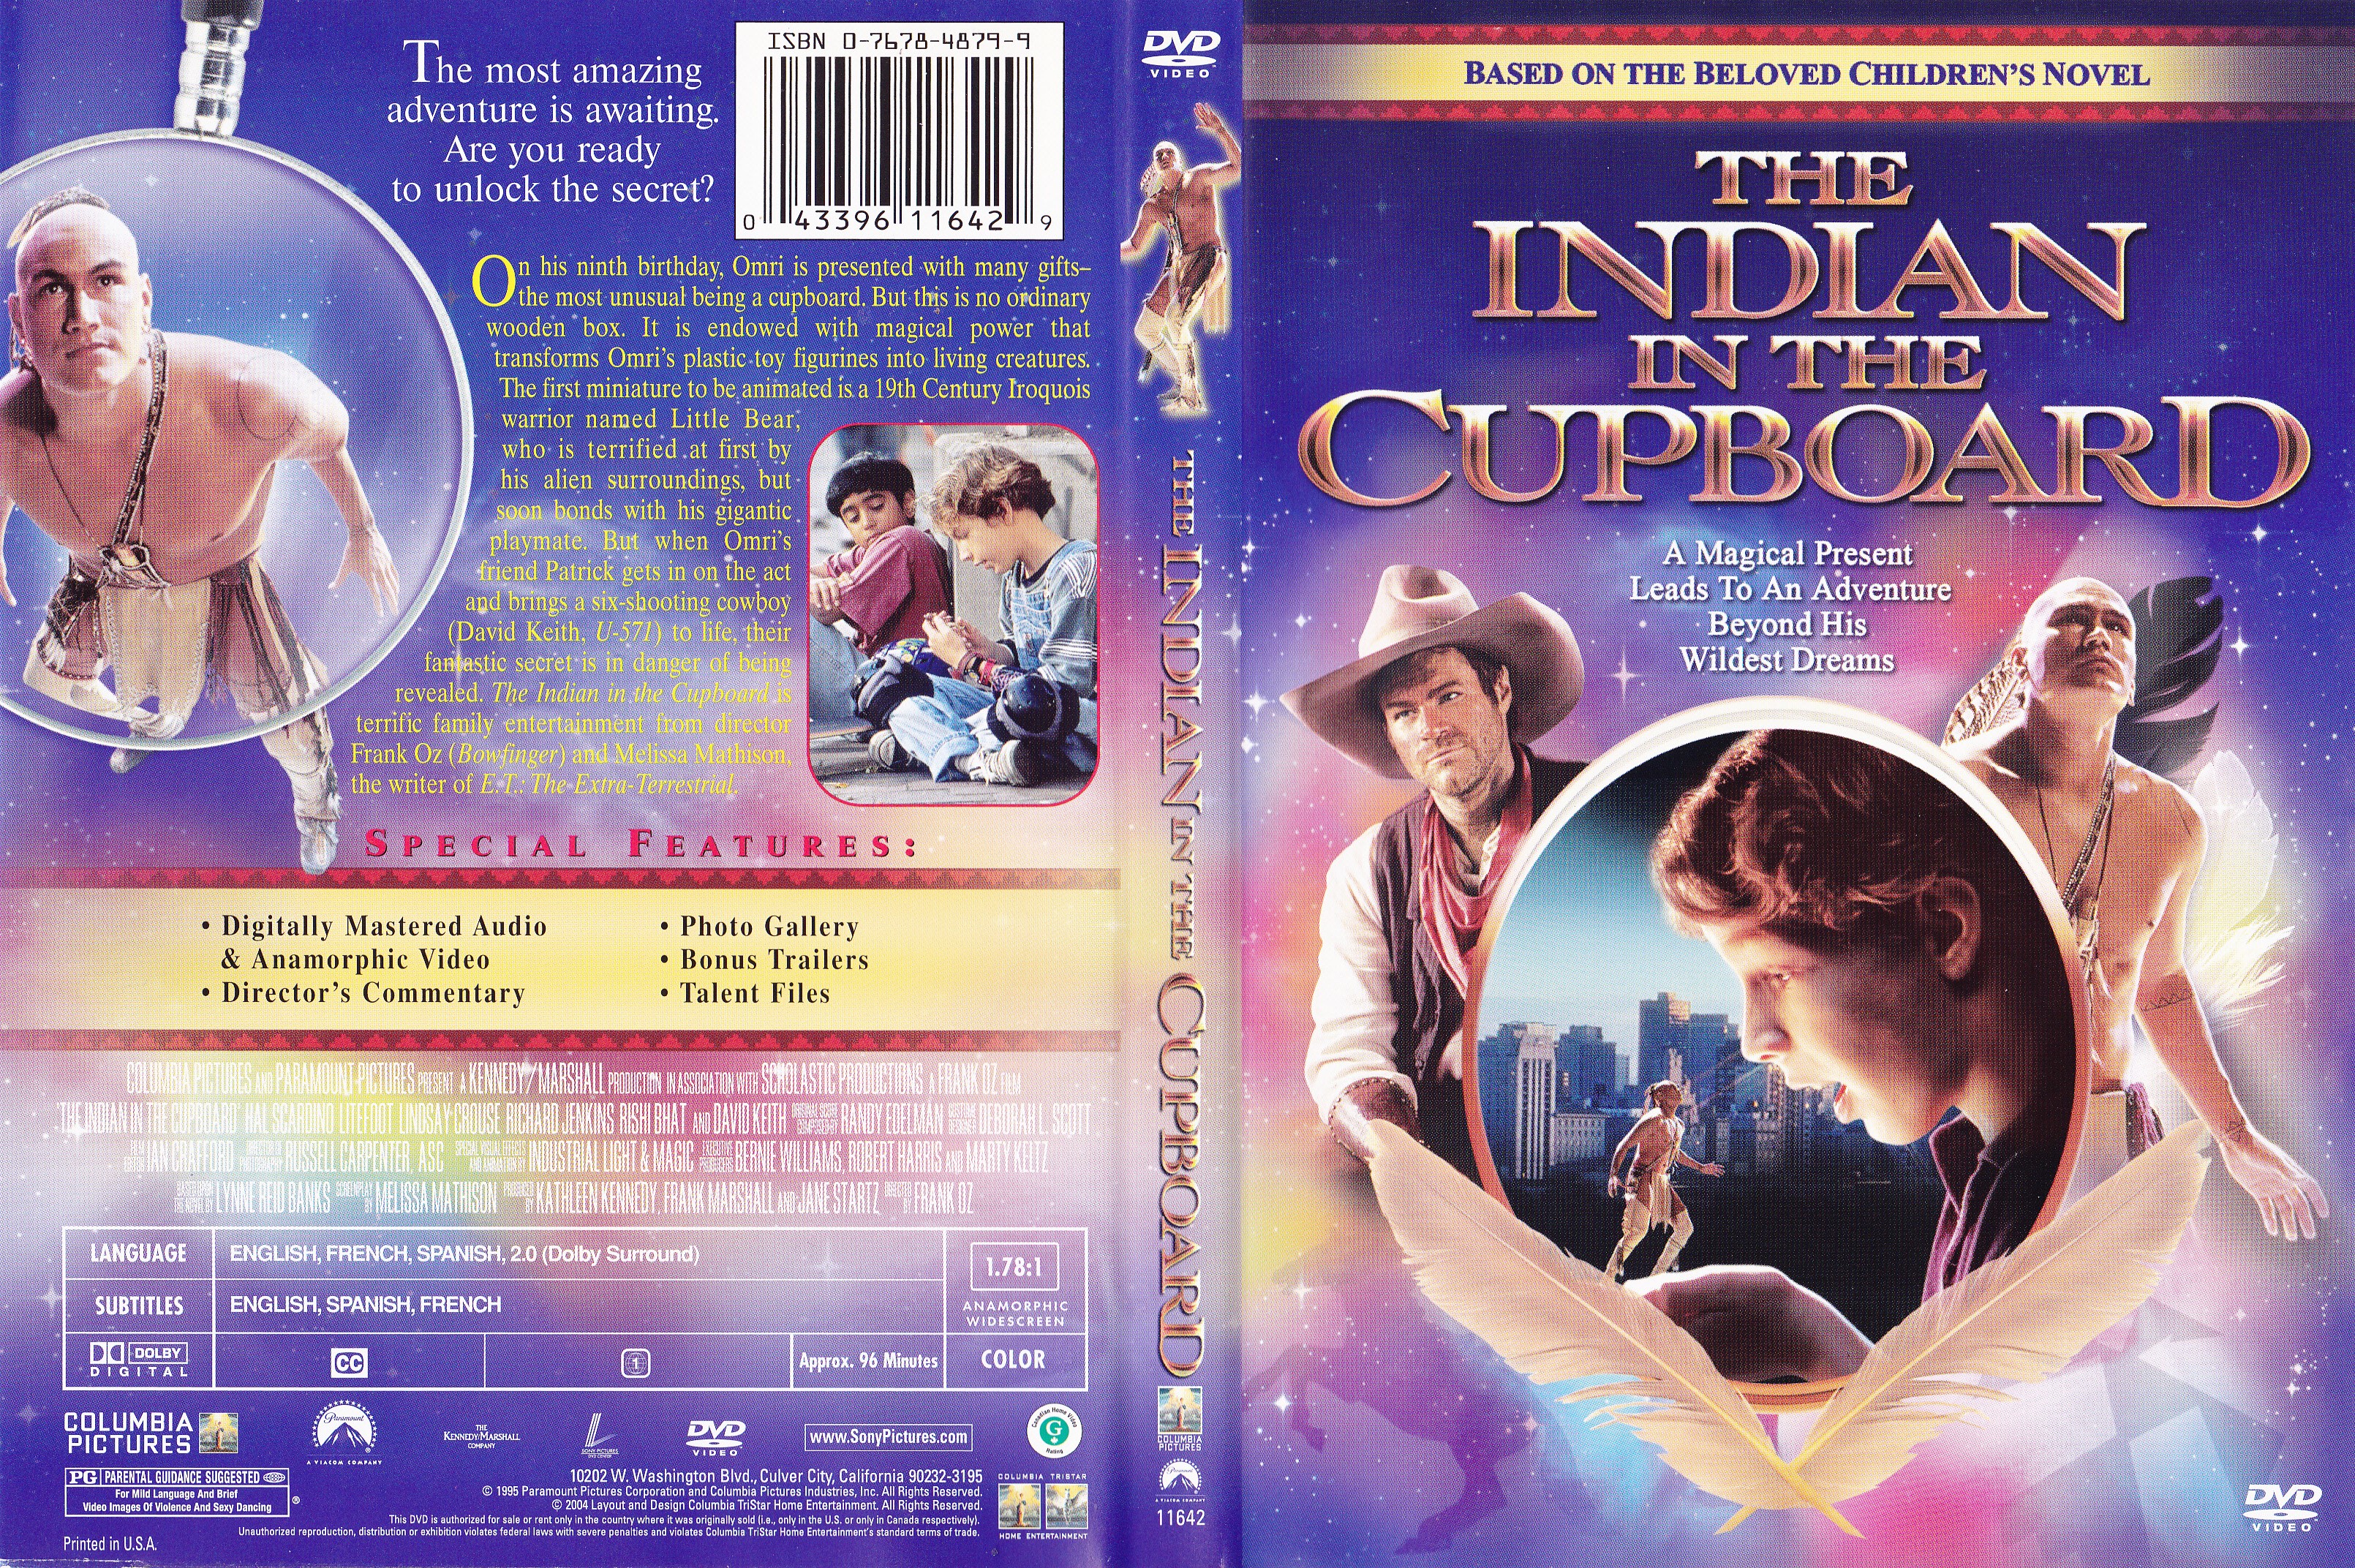 Jaquette DVD The indian in the cupboard - Un indien dans le placard (Canadienne)